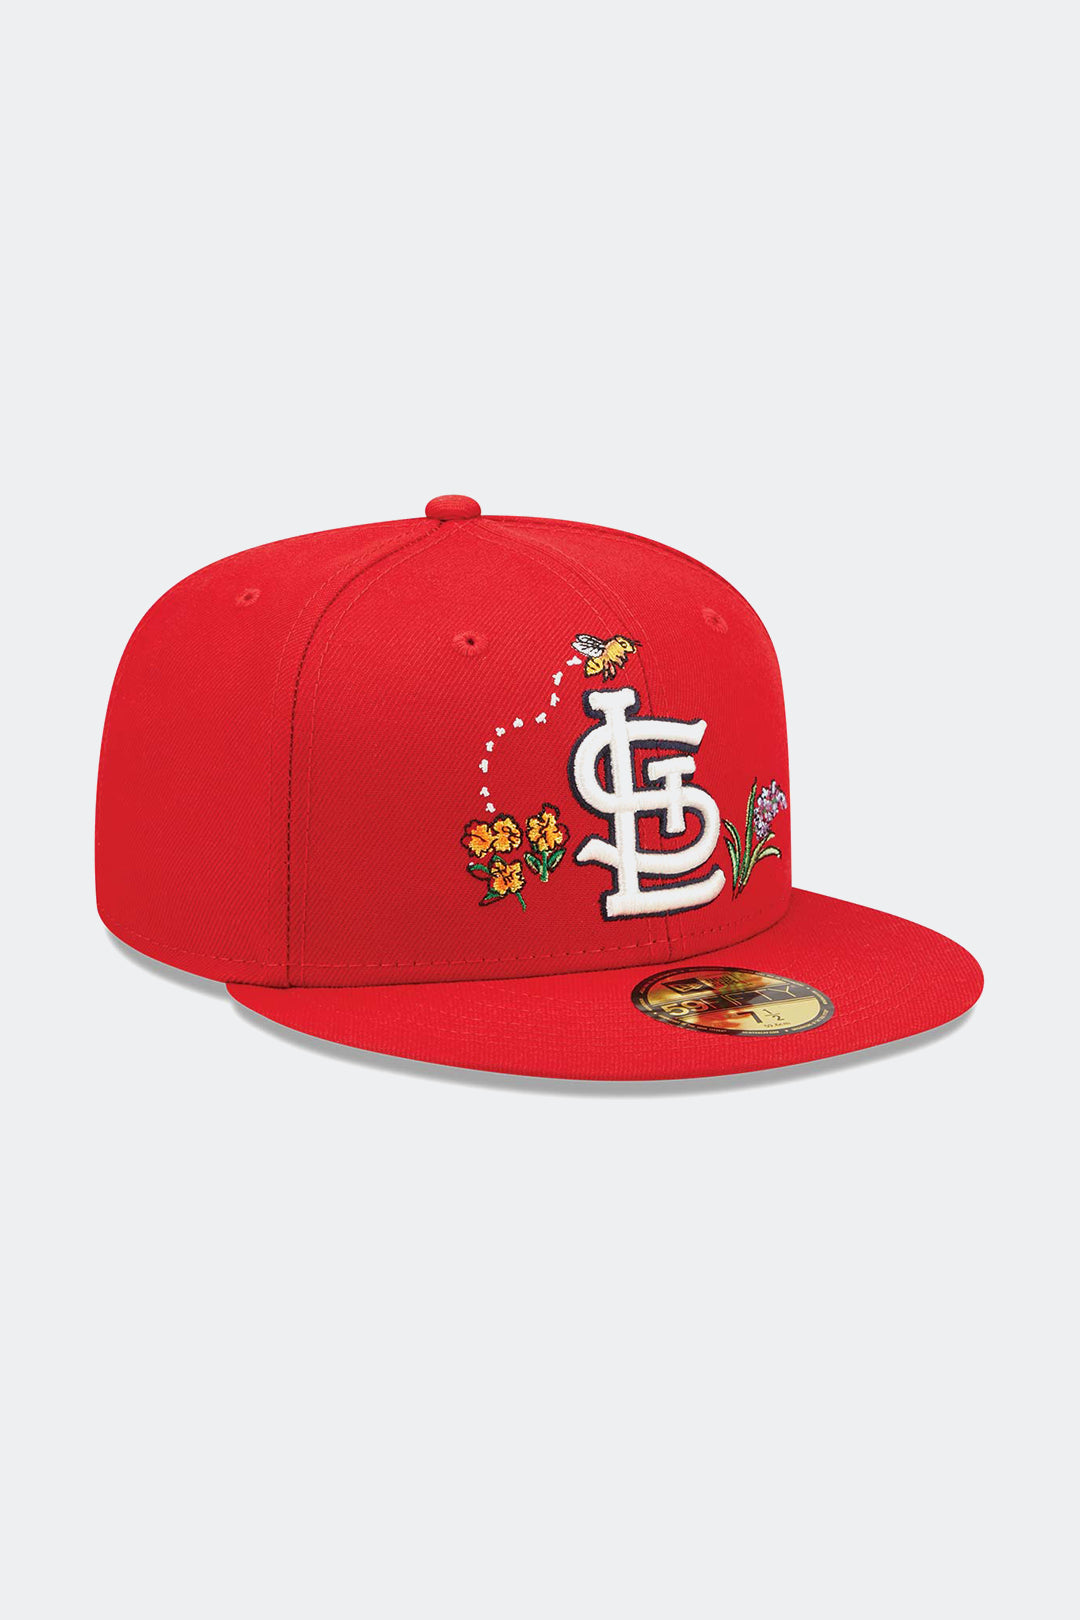 NEW ERA 59FIFTY ST LOUIS CARDINALS "WATERCOLOR FLORAL" - HYPE